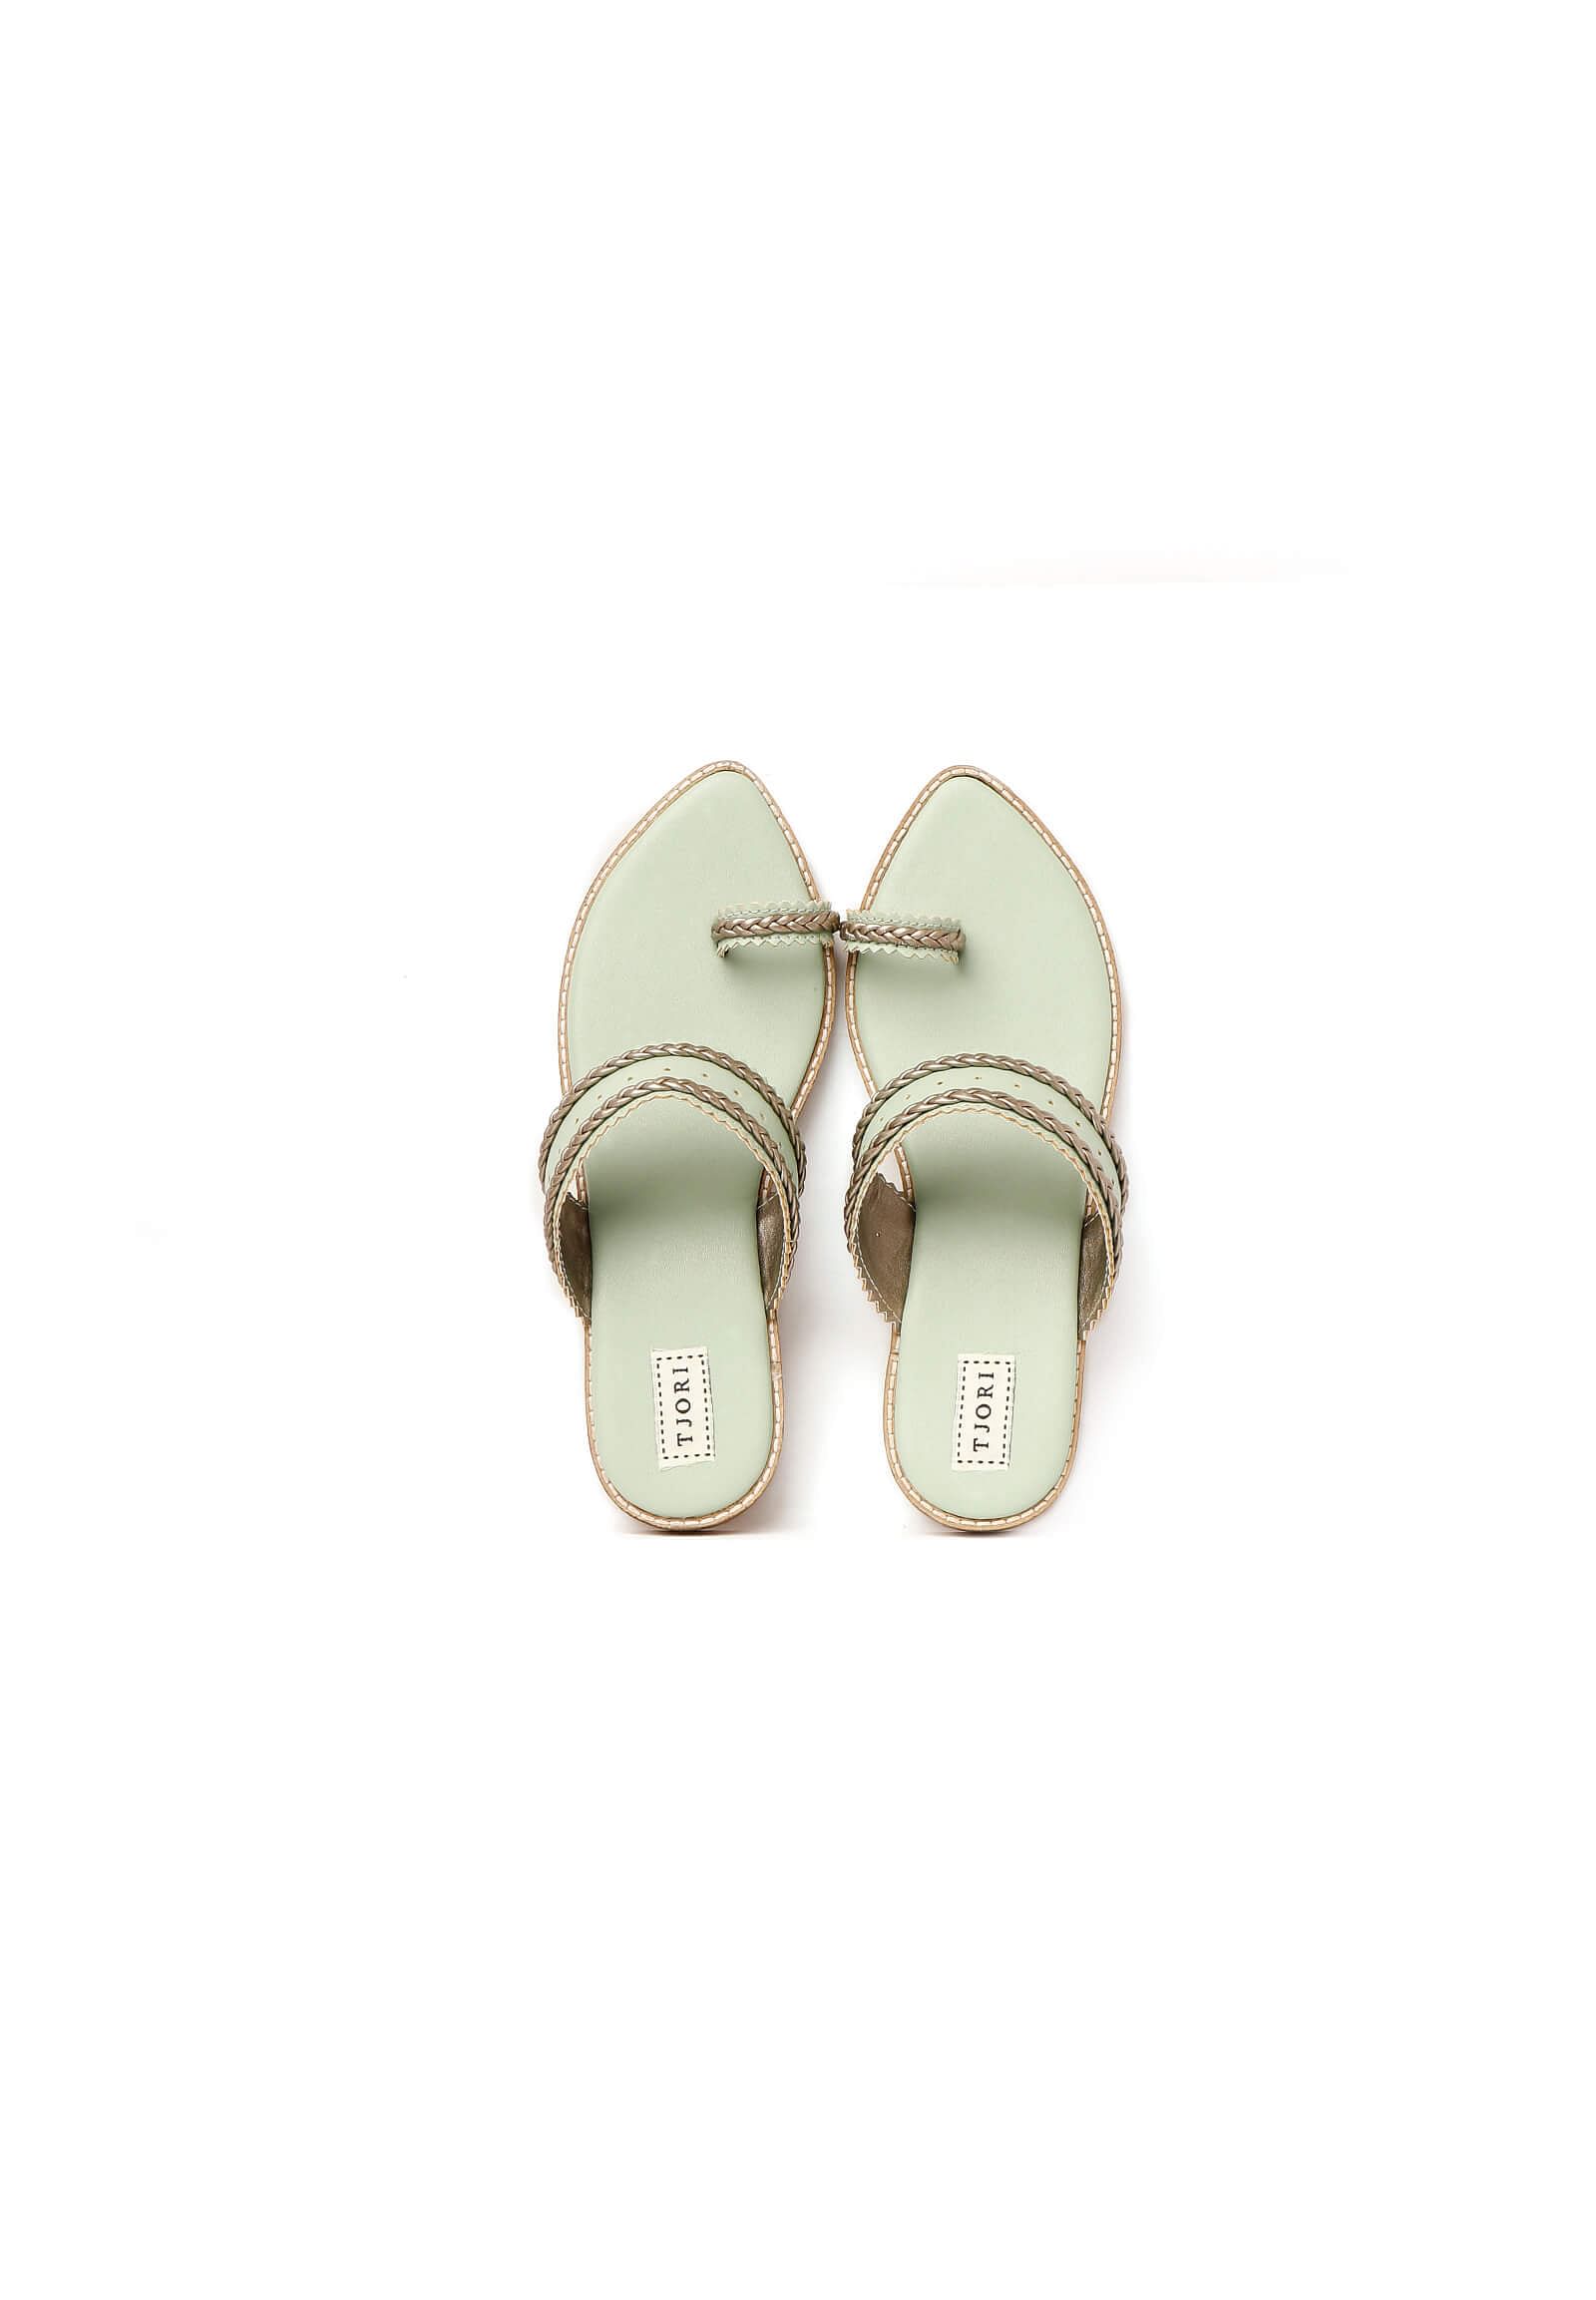 Mint Green & Silver Cruelty Free Leather Sandals